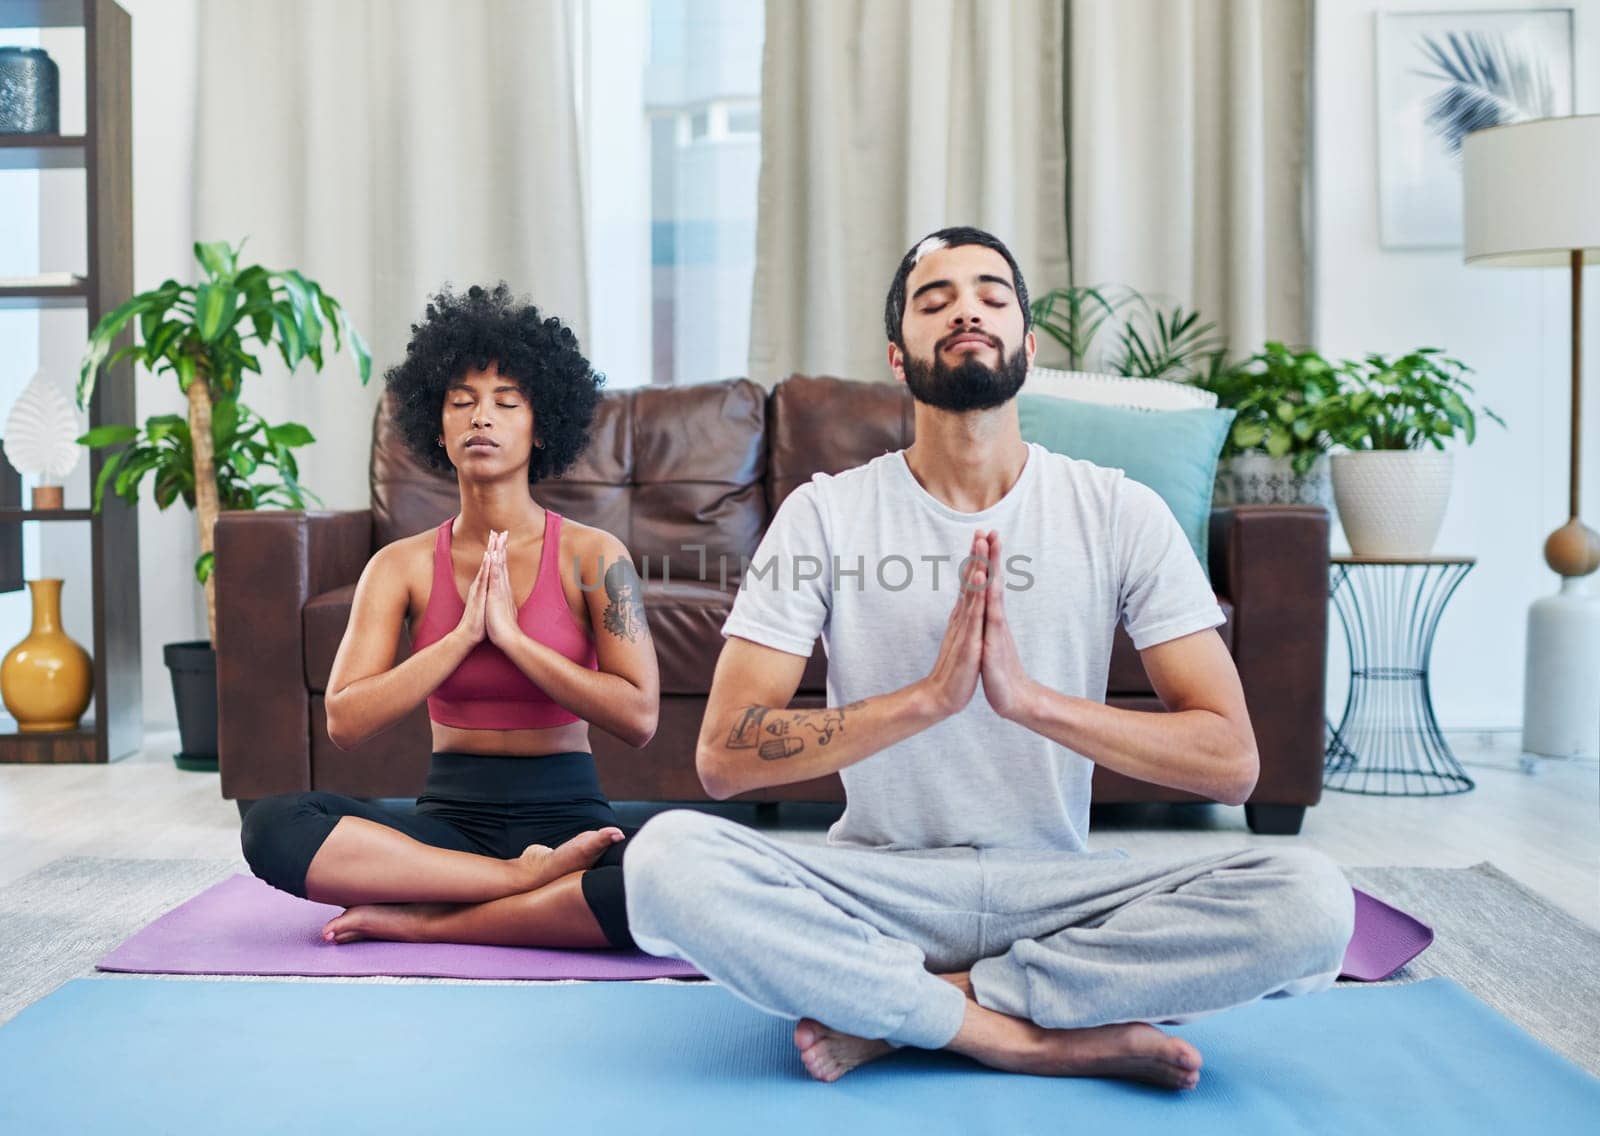 Yoga improved our health and our relationship. a young couple practising yoga in their living room